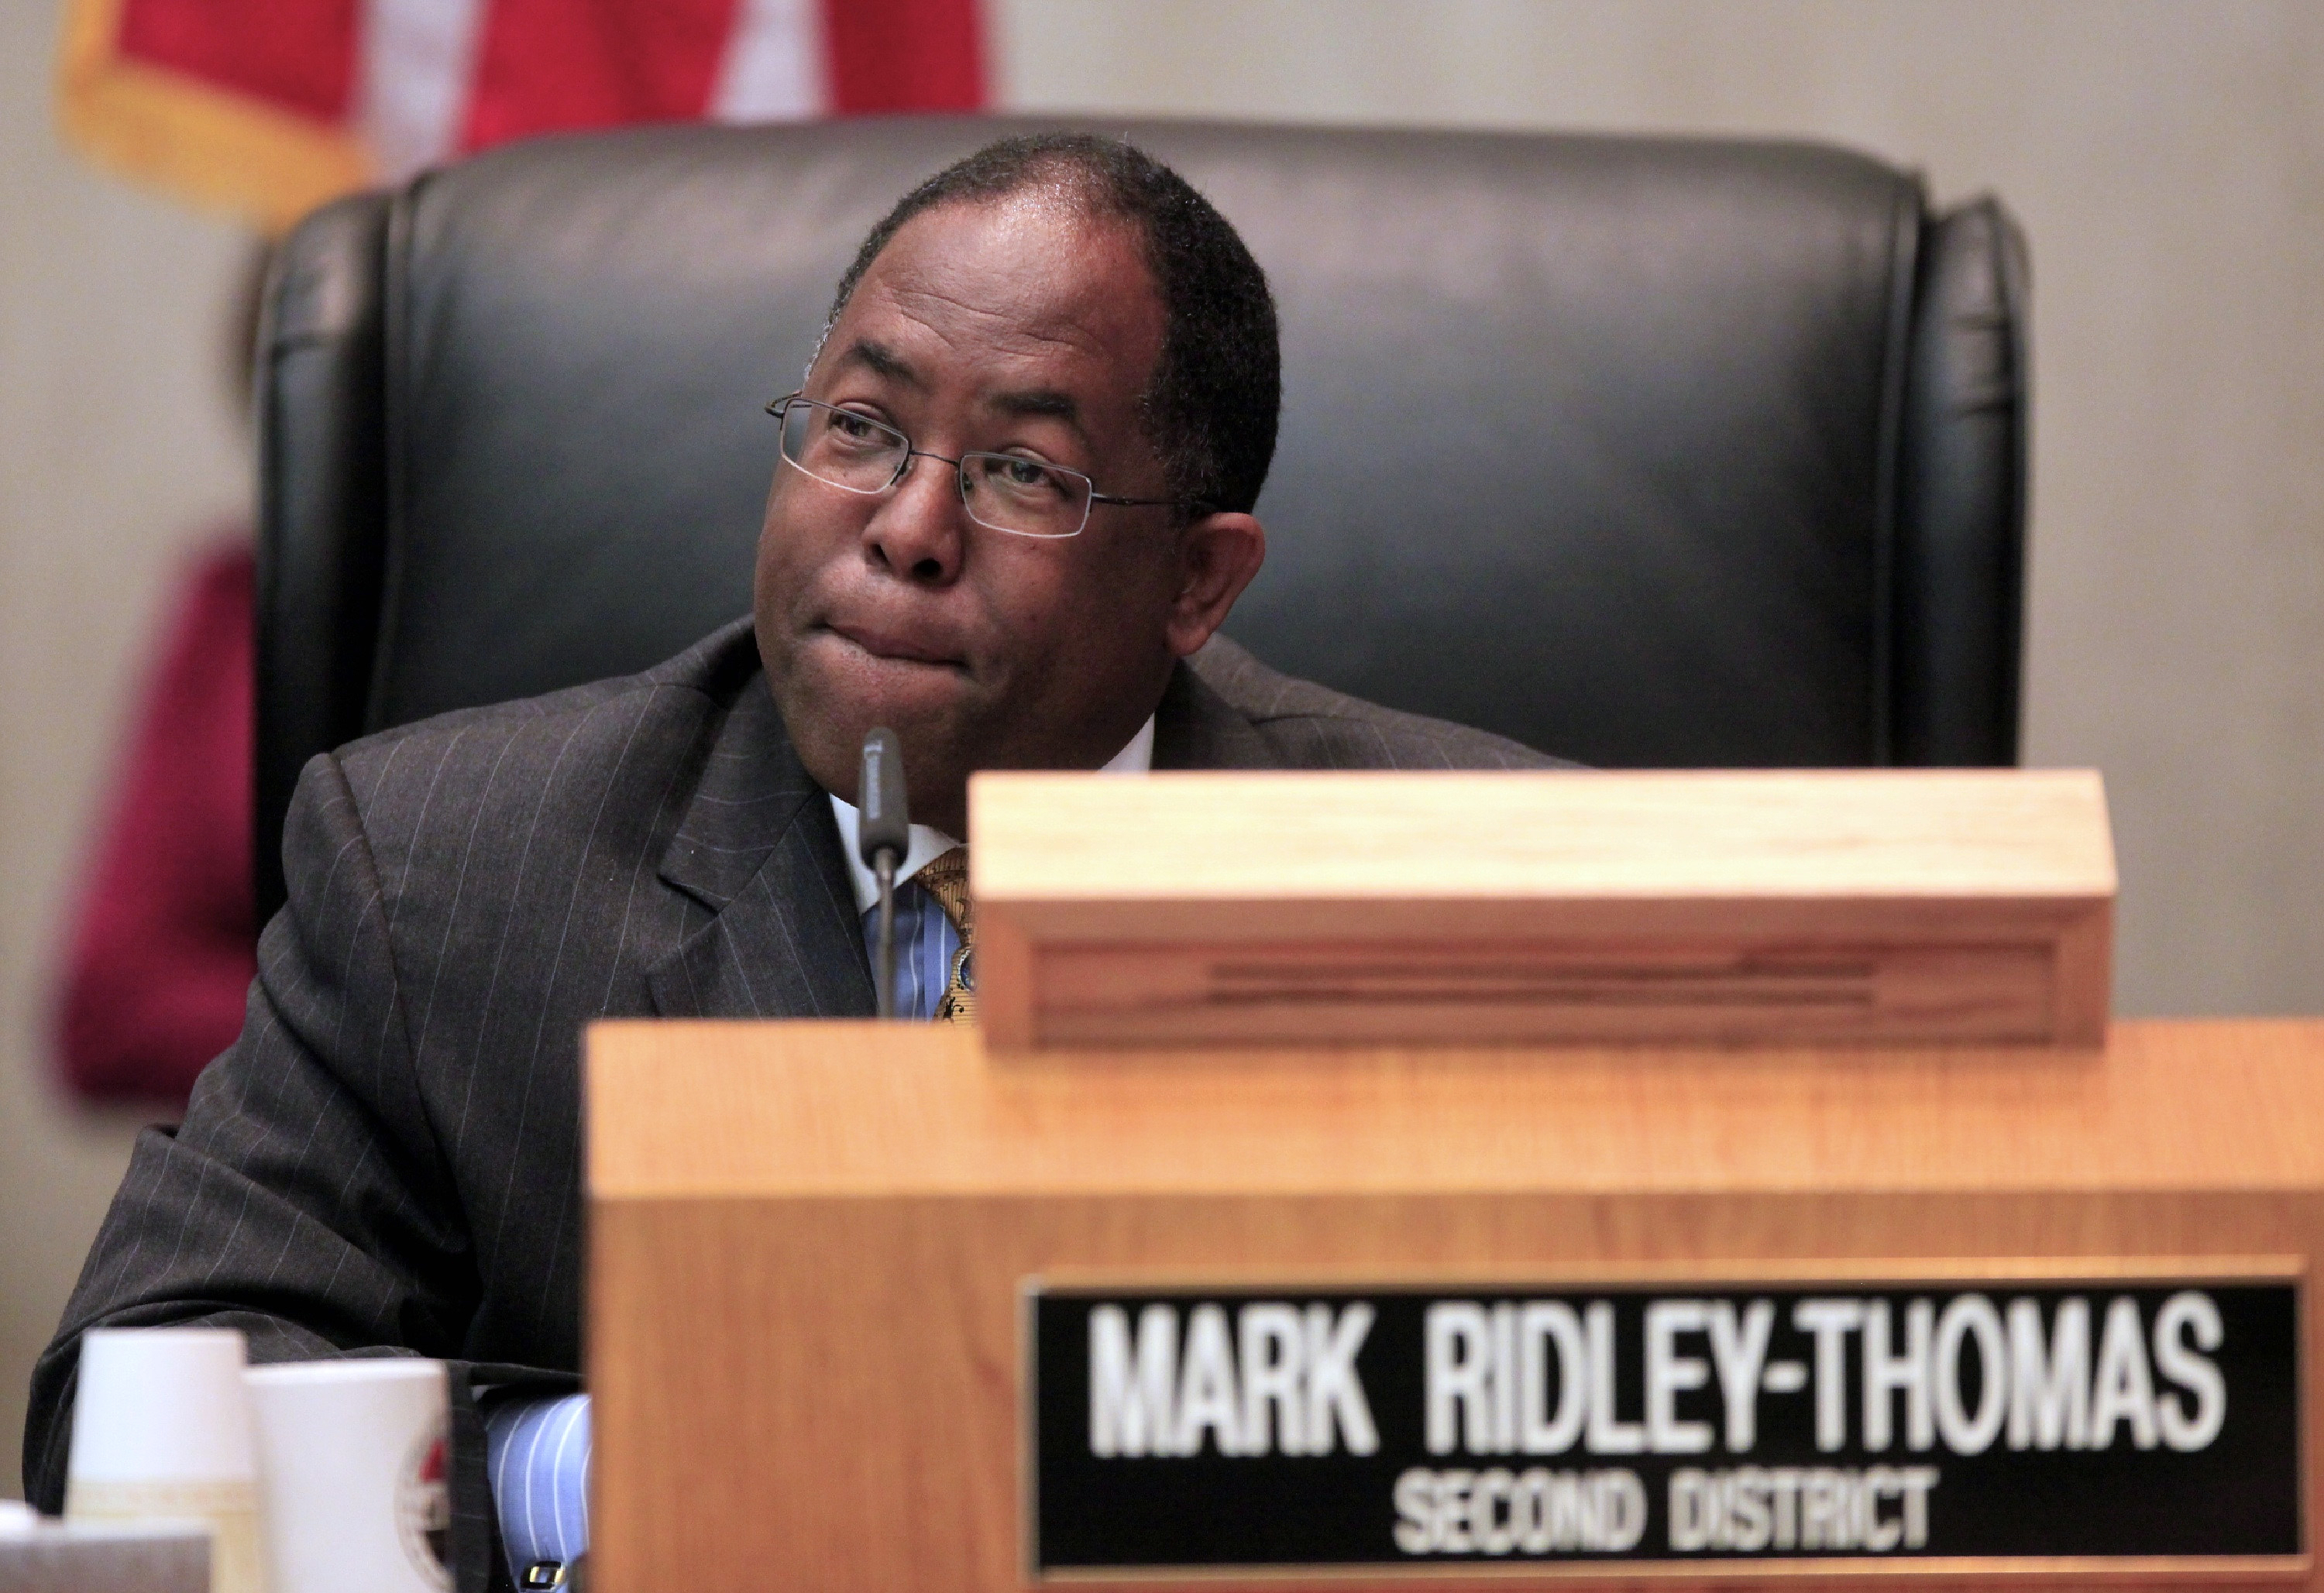 In this Jun 1, 2010, photo, Los Angeles County Supervisor Mark Ridley-Thomas casts the deciding vote for the Board of Supervisors 3-2 vote to join the city in its economic boycott of Arizona over its SB 1070 law targeting illegal immigrants in Los Angeles. (AP Photo/Damian Dovarganes)